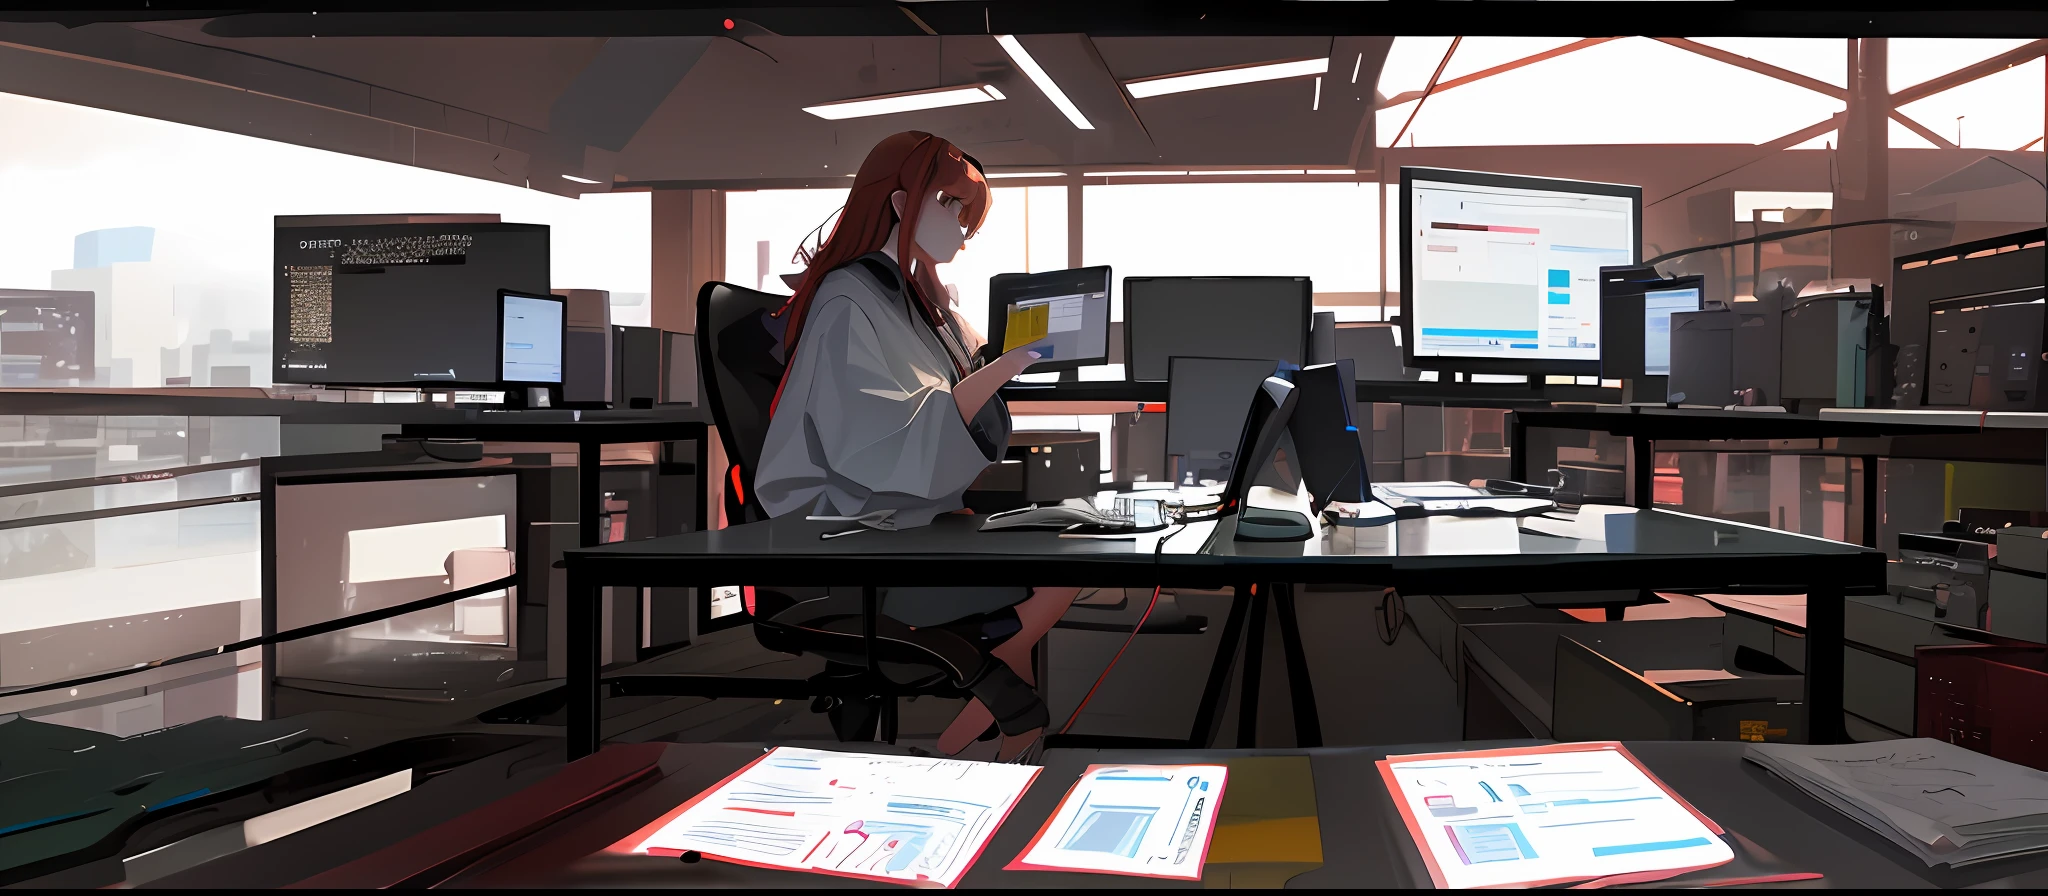 There is a woman sitting at her desk, holding a laptop with a monitor on the table, computer screen showing stock information, red and green candlestick chart, digital animation illustration, in pixiv, keyframe illustration, digital animation art, guweiz on pixiv art station, ArtStation pixiv trend